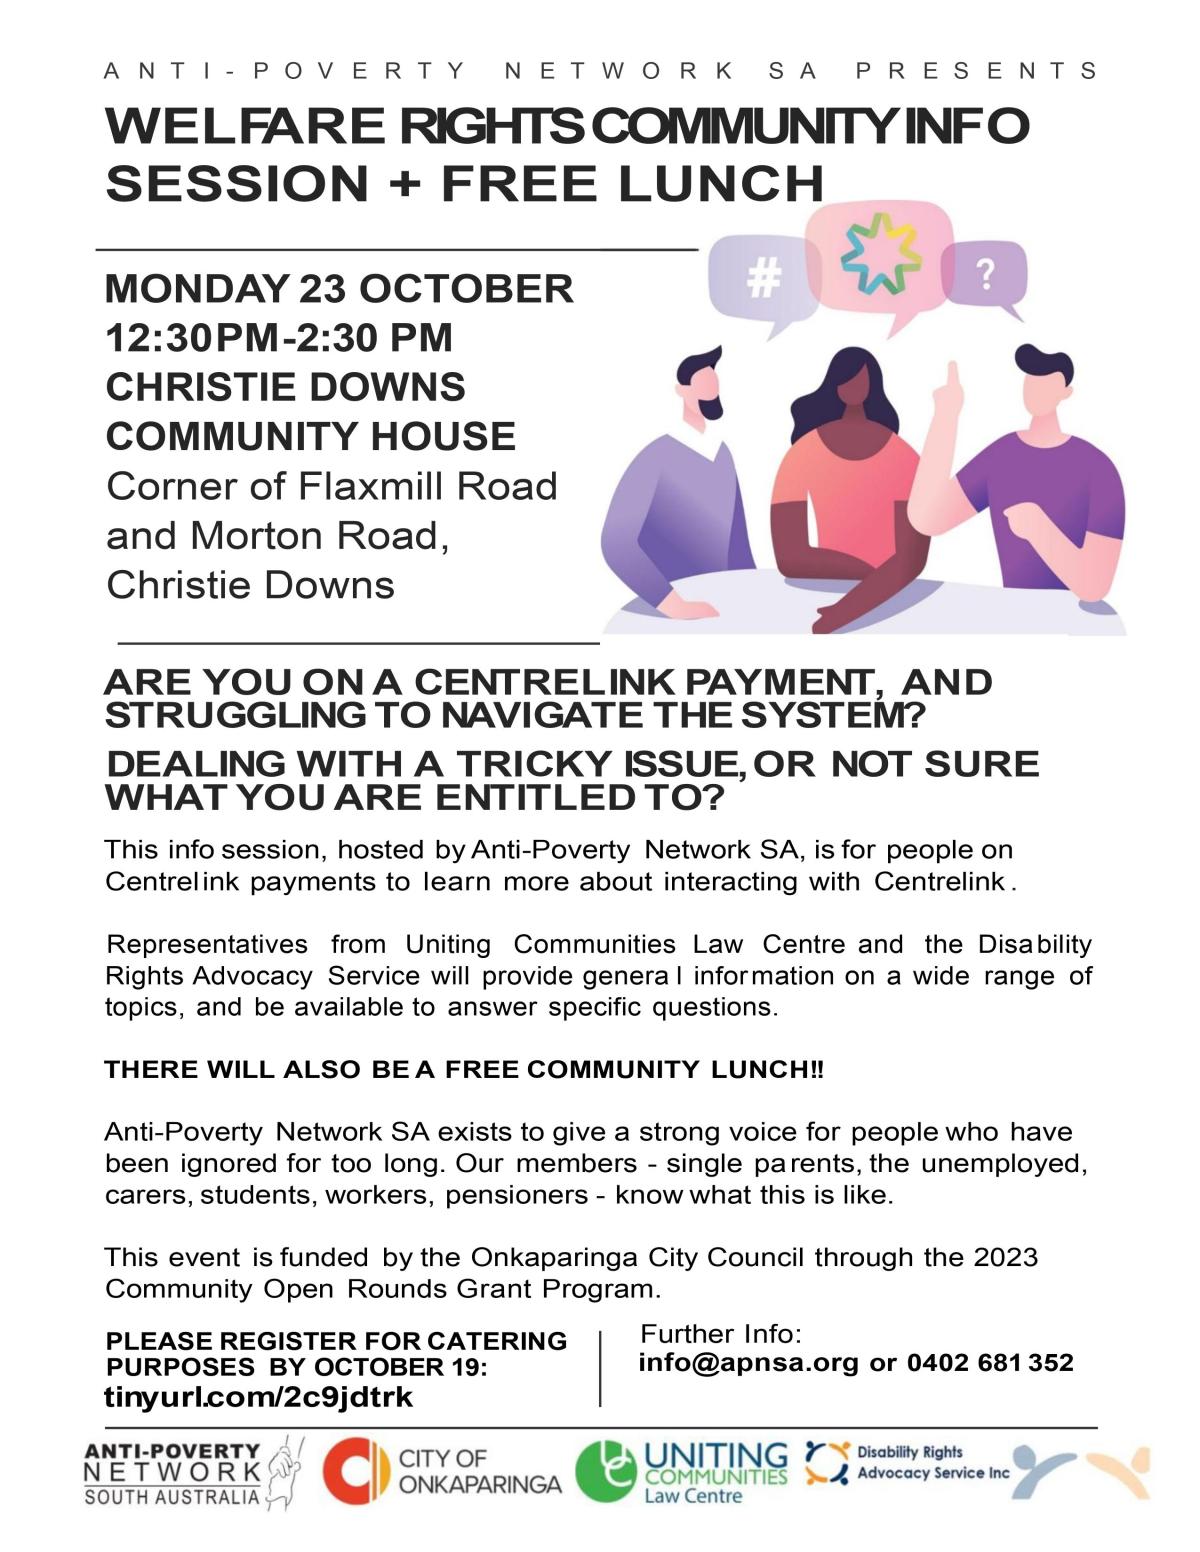 Christie Downs Welfare Rights Info Session + Free Lunch